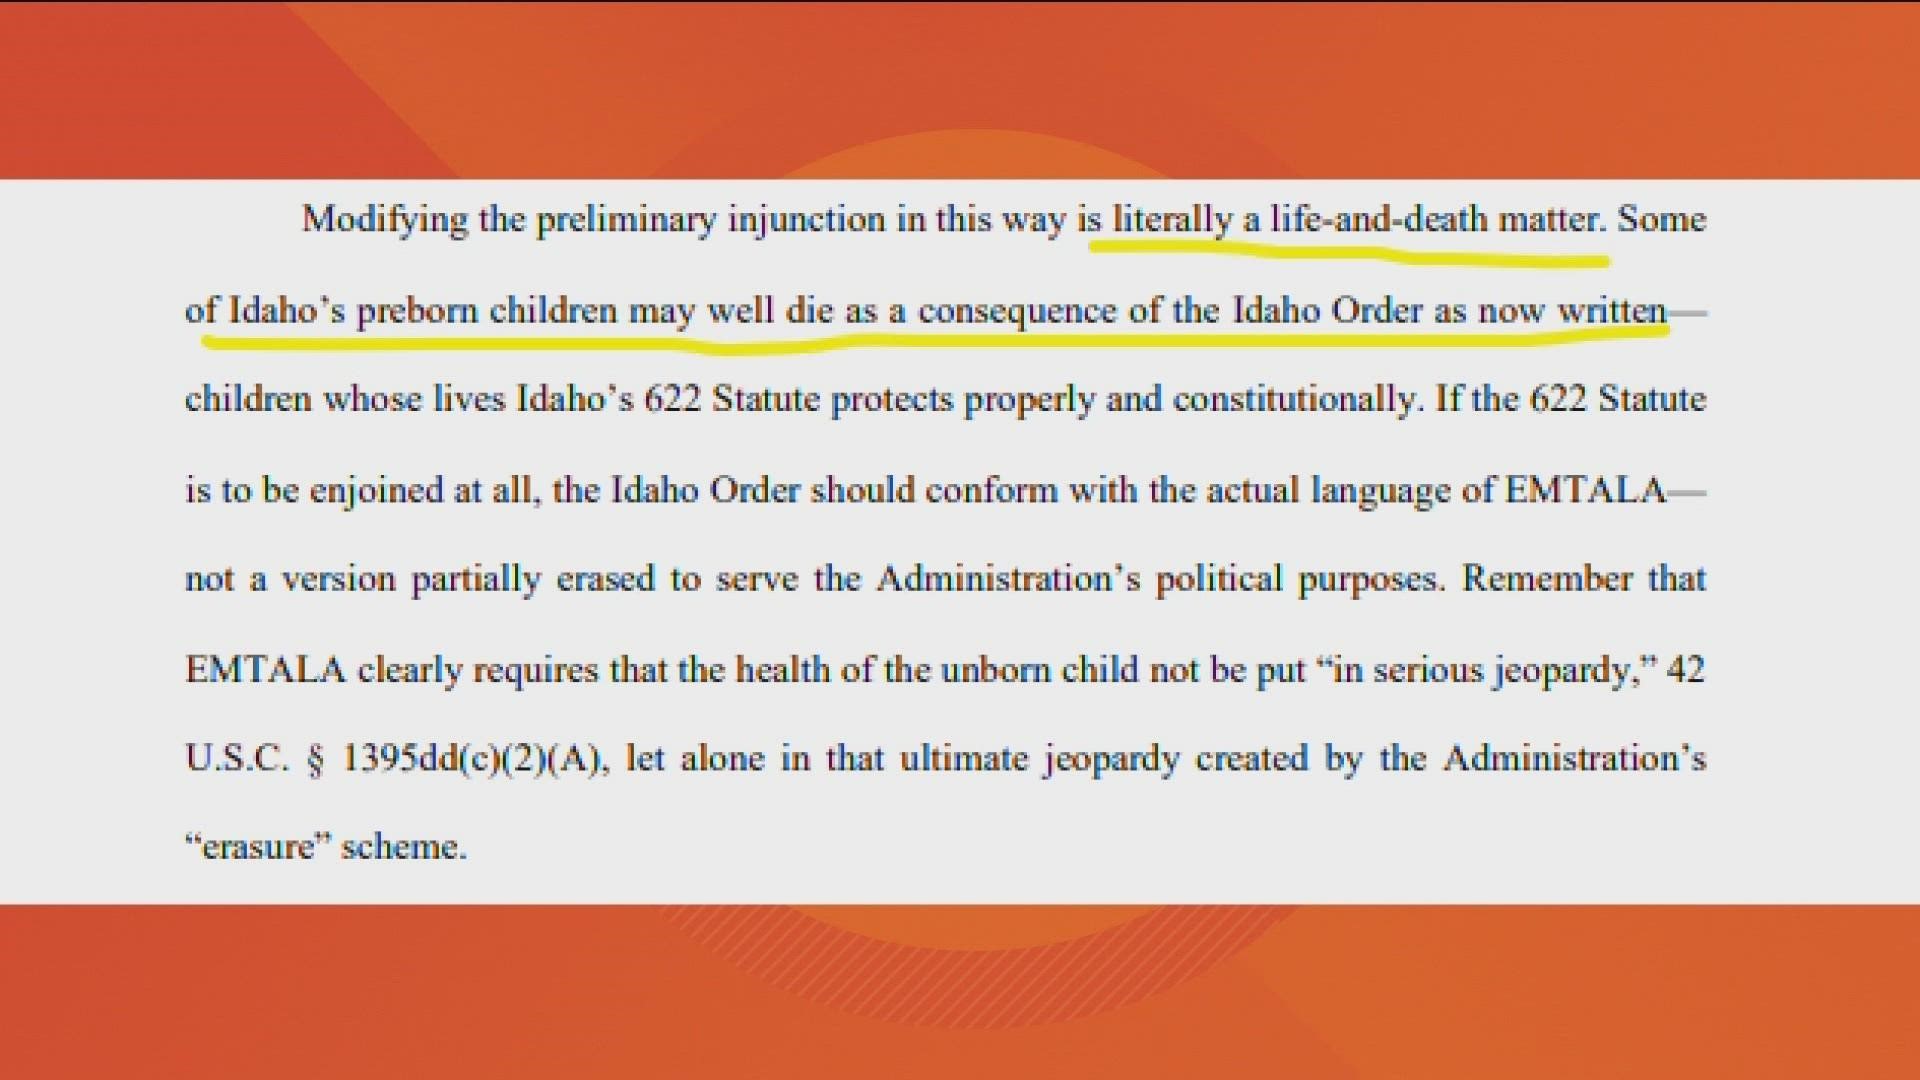 The Idaho Legislature argues a judge should reconsider his ruling as it is a "life-and-death matter" because "preborn children may well die."